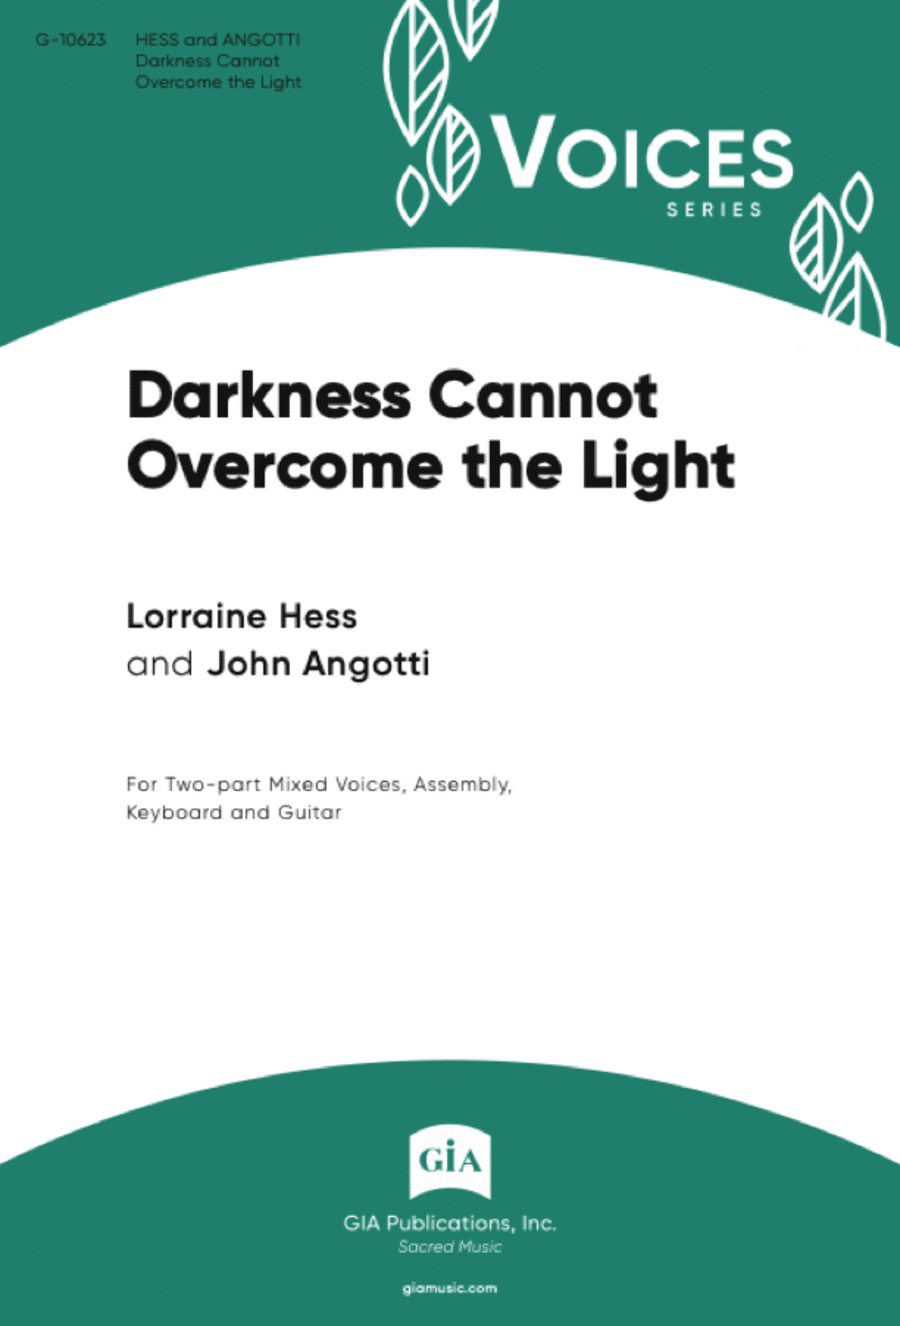 Darkness Cannot Overcome the Light - Guitar edition